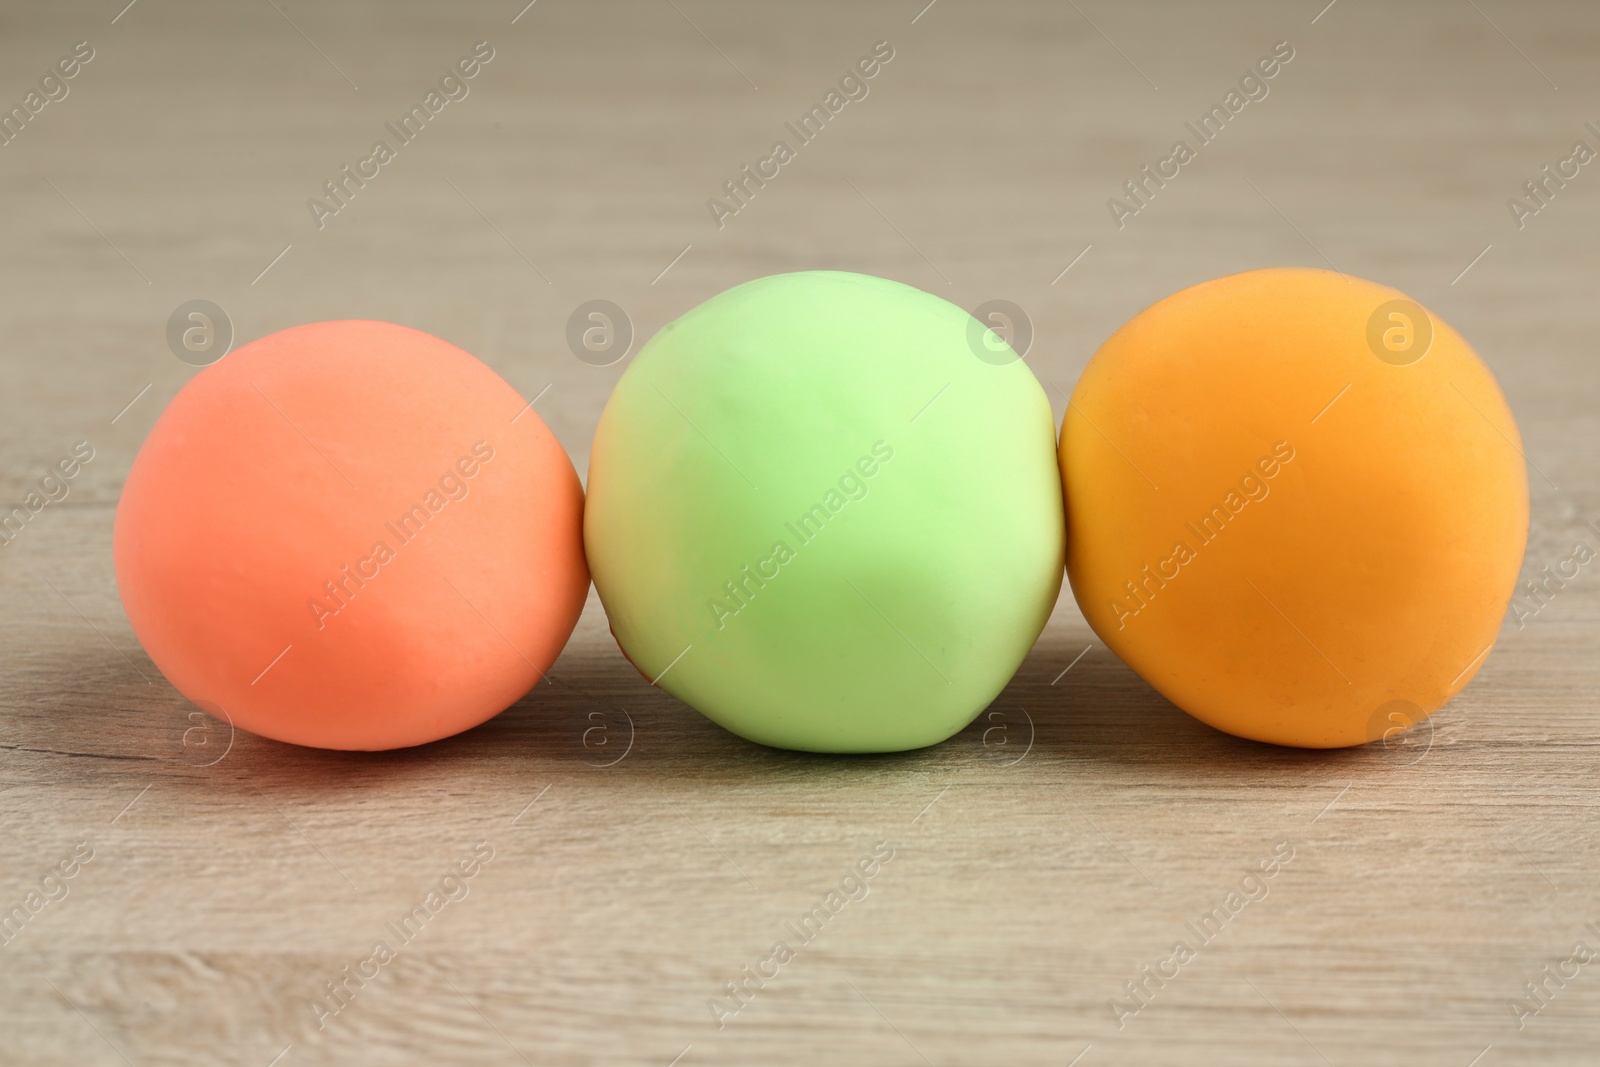 Photo of Different color play dough on wooden table, closeup